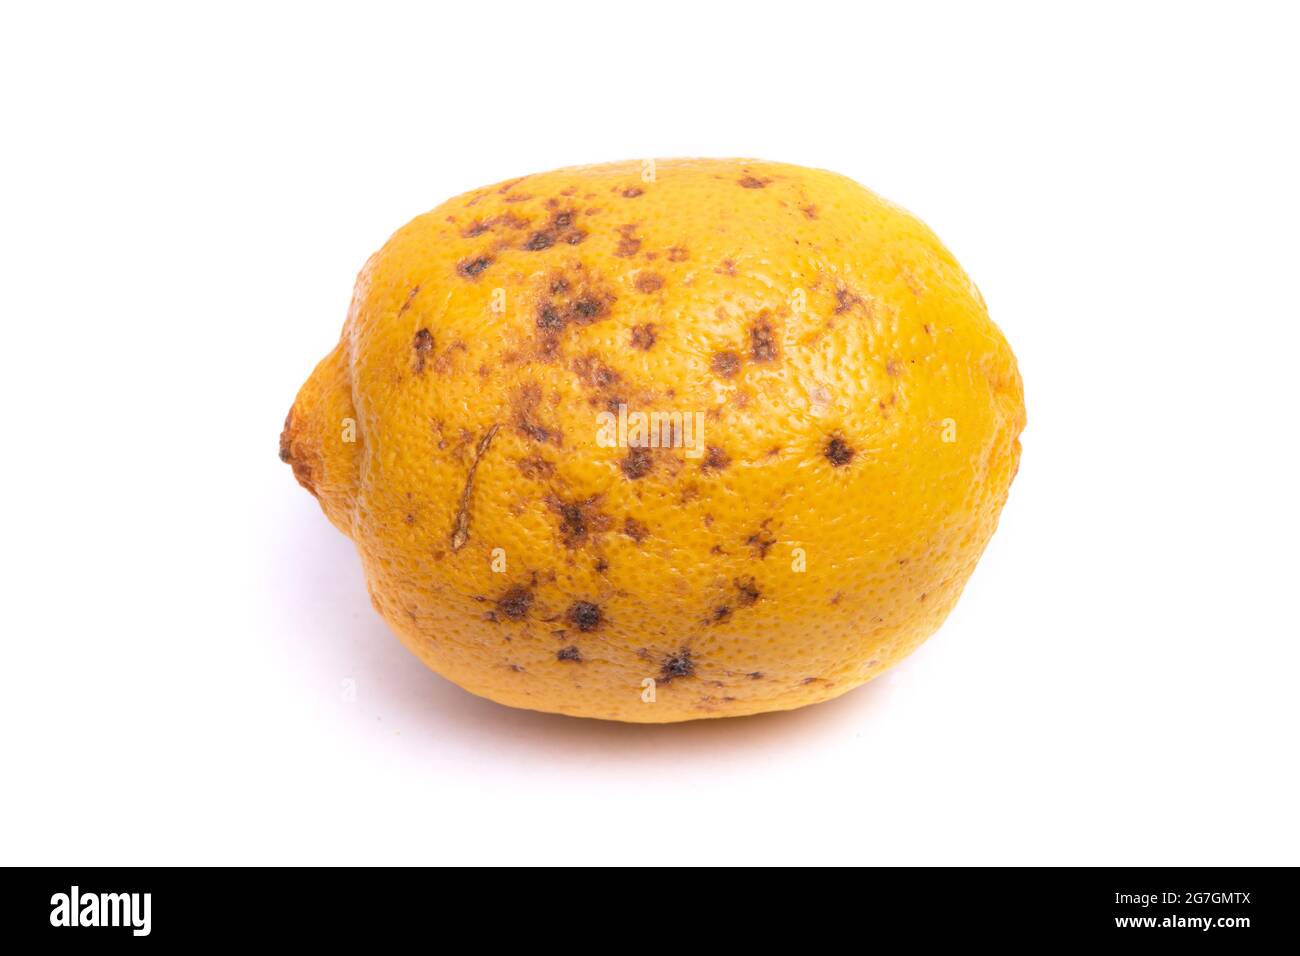 Spoiled overroten lemon with mouldish dots isolated over white background Stock Photo